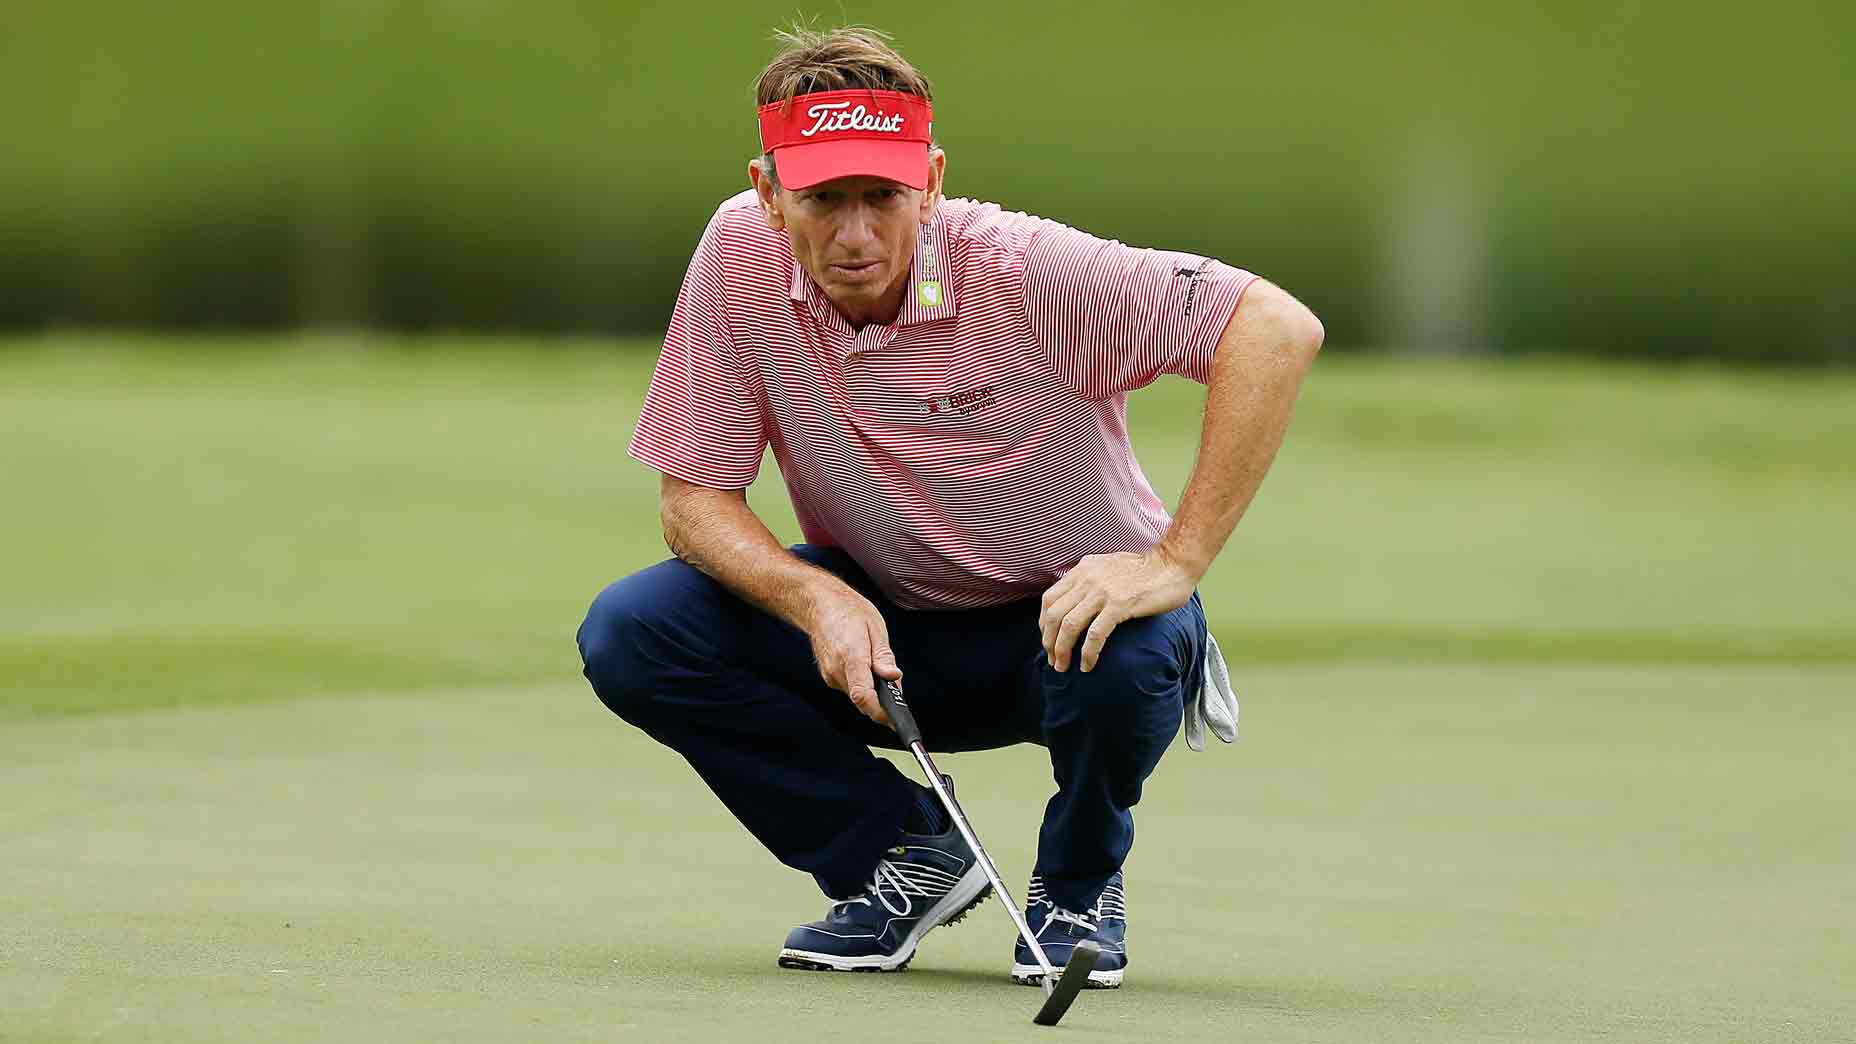 Brad Faxon, an 8-time PGA TOUR winner, shares a putting drill that turns up the pressure on the green in order to improve your stroke